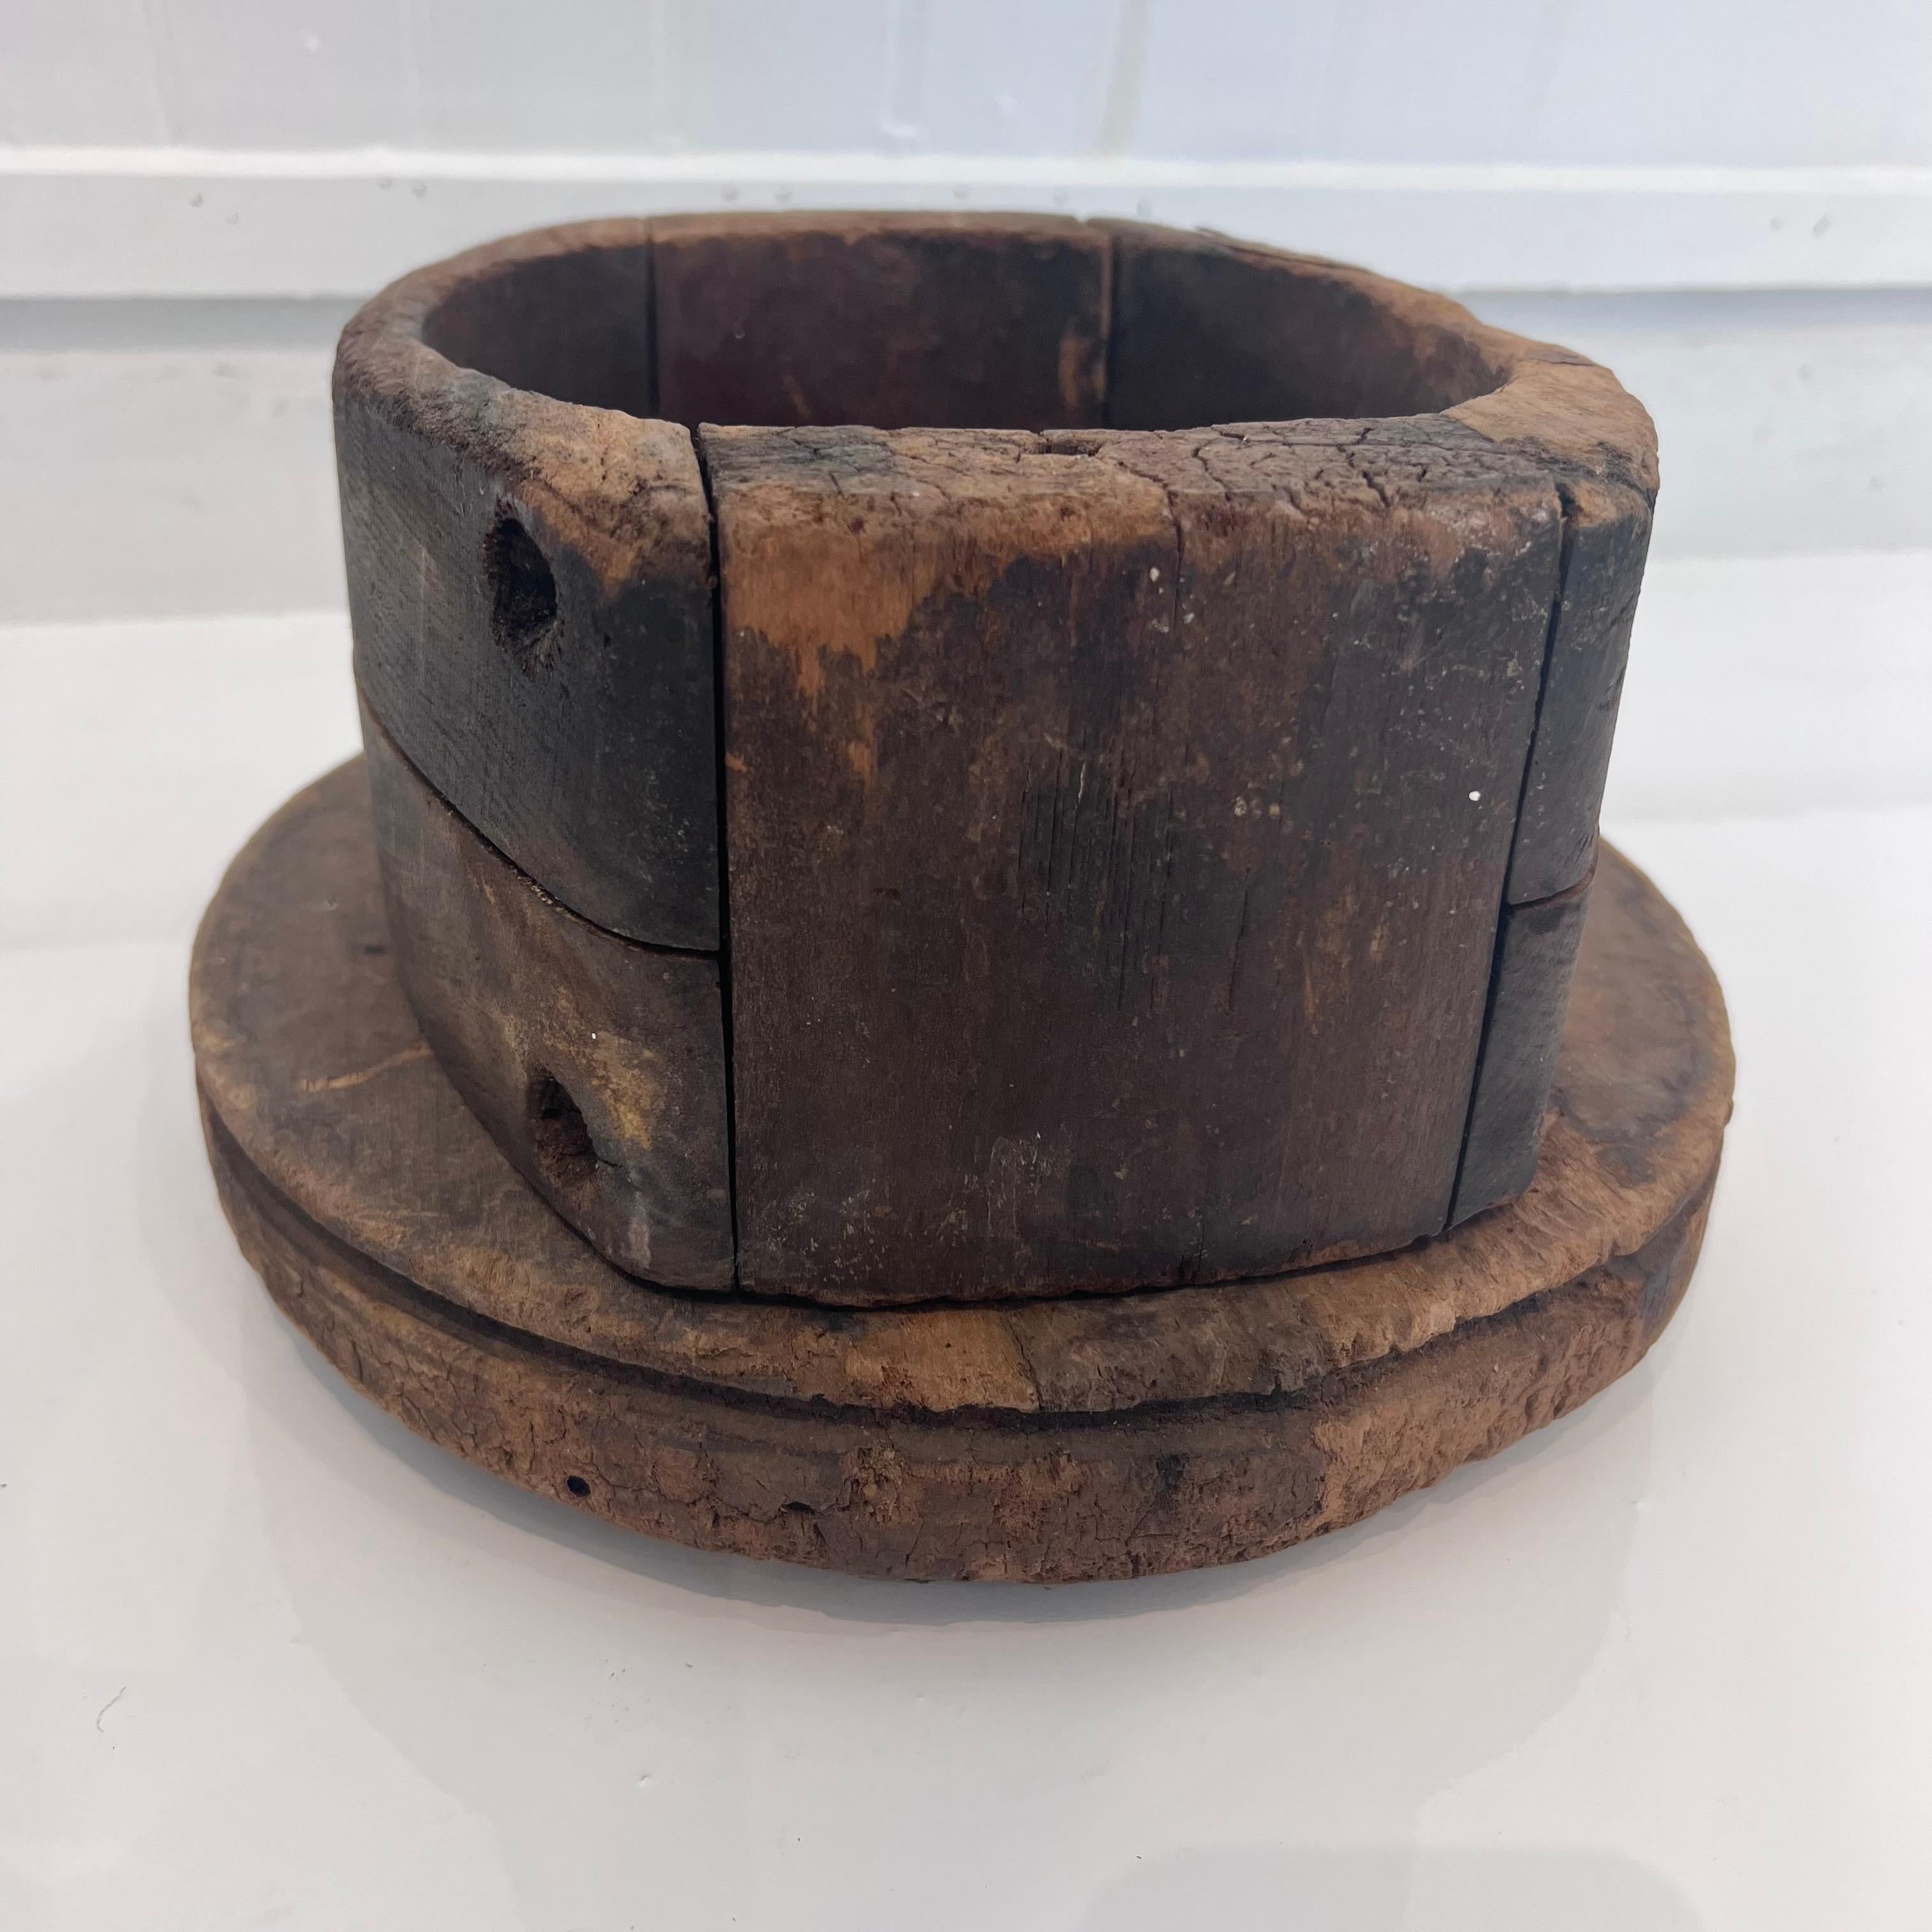 Beautiful handcrafted milliners hat block made in the USA, early 20th century. Has been well used and as a result shows a perfectly aged, primitive patina. Gorgeous piece of millinery history and a perfect addition to add to any home. 